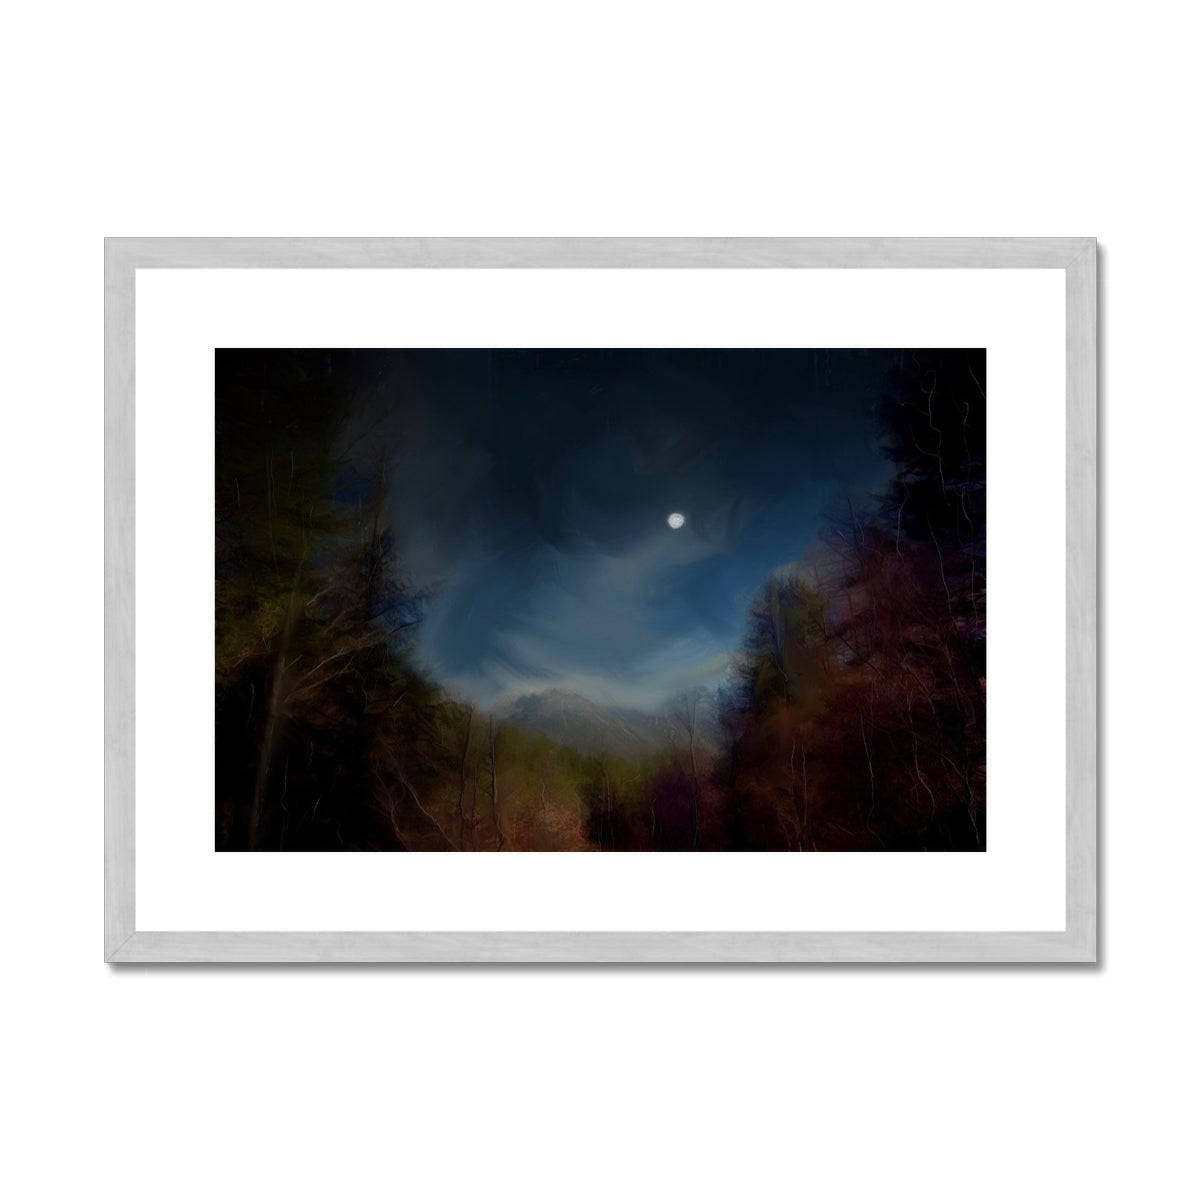 Glencoe Lochan Moonlight Painting | Antique Framed & Mounted Prints From Scotland-Antique Framed & Mounted Prints-Scottish Lochs & Mountains Art Gallery-A2 Landscape-Silver Frame-Paintings, Prints, Homeware, Art Gifts From Scotland By Scottish Artist Kevin Hunter